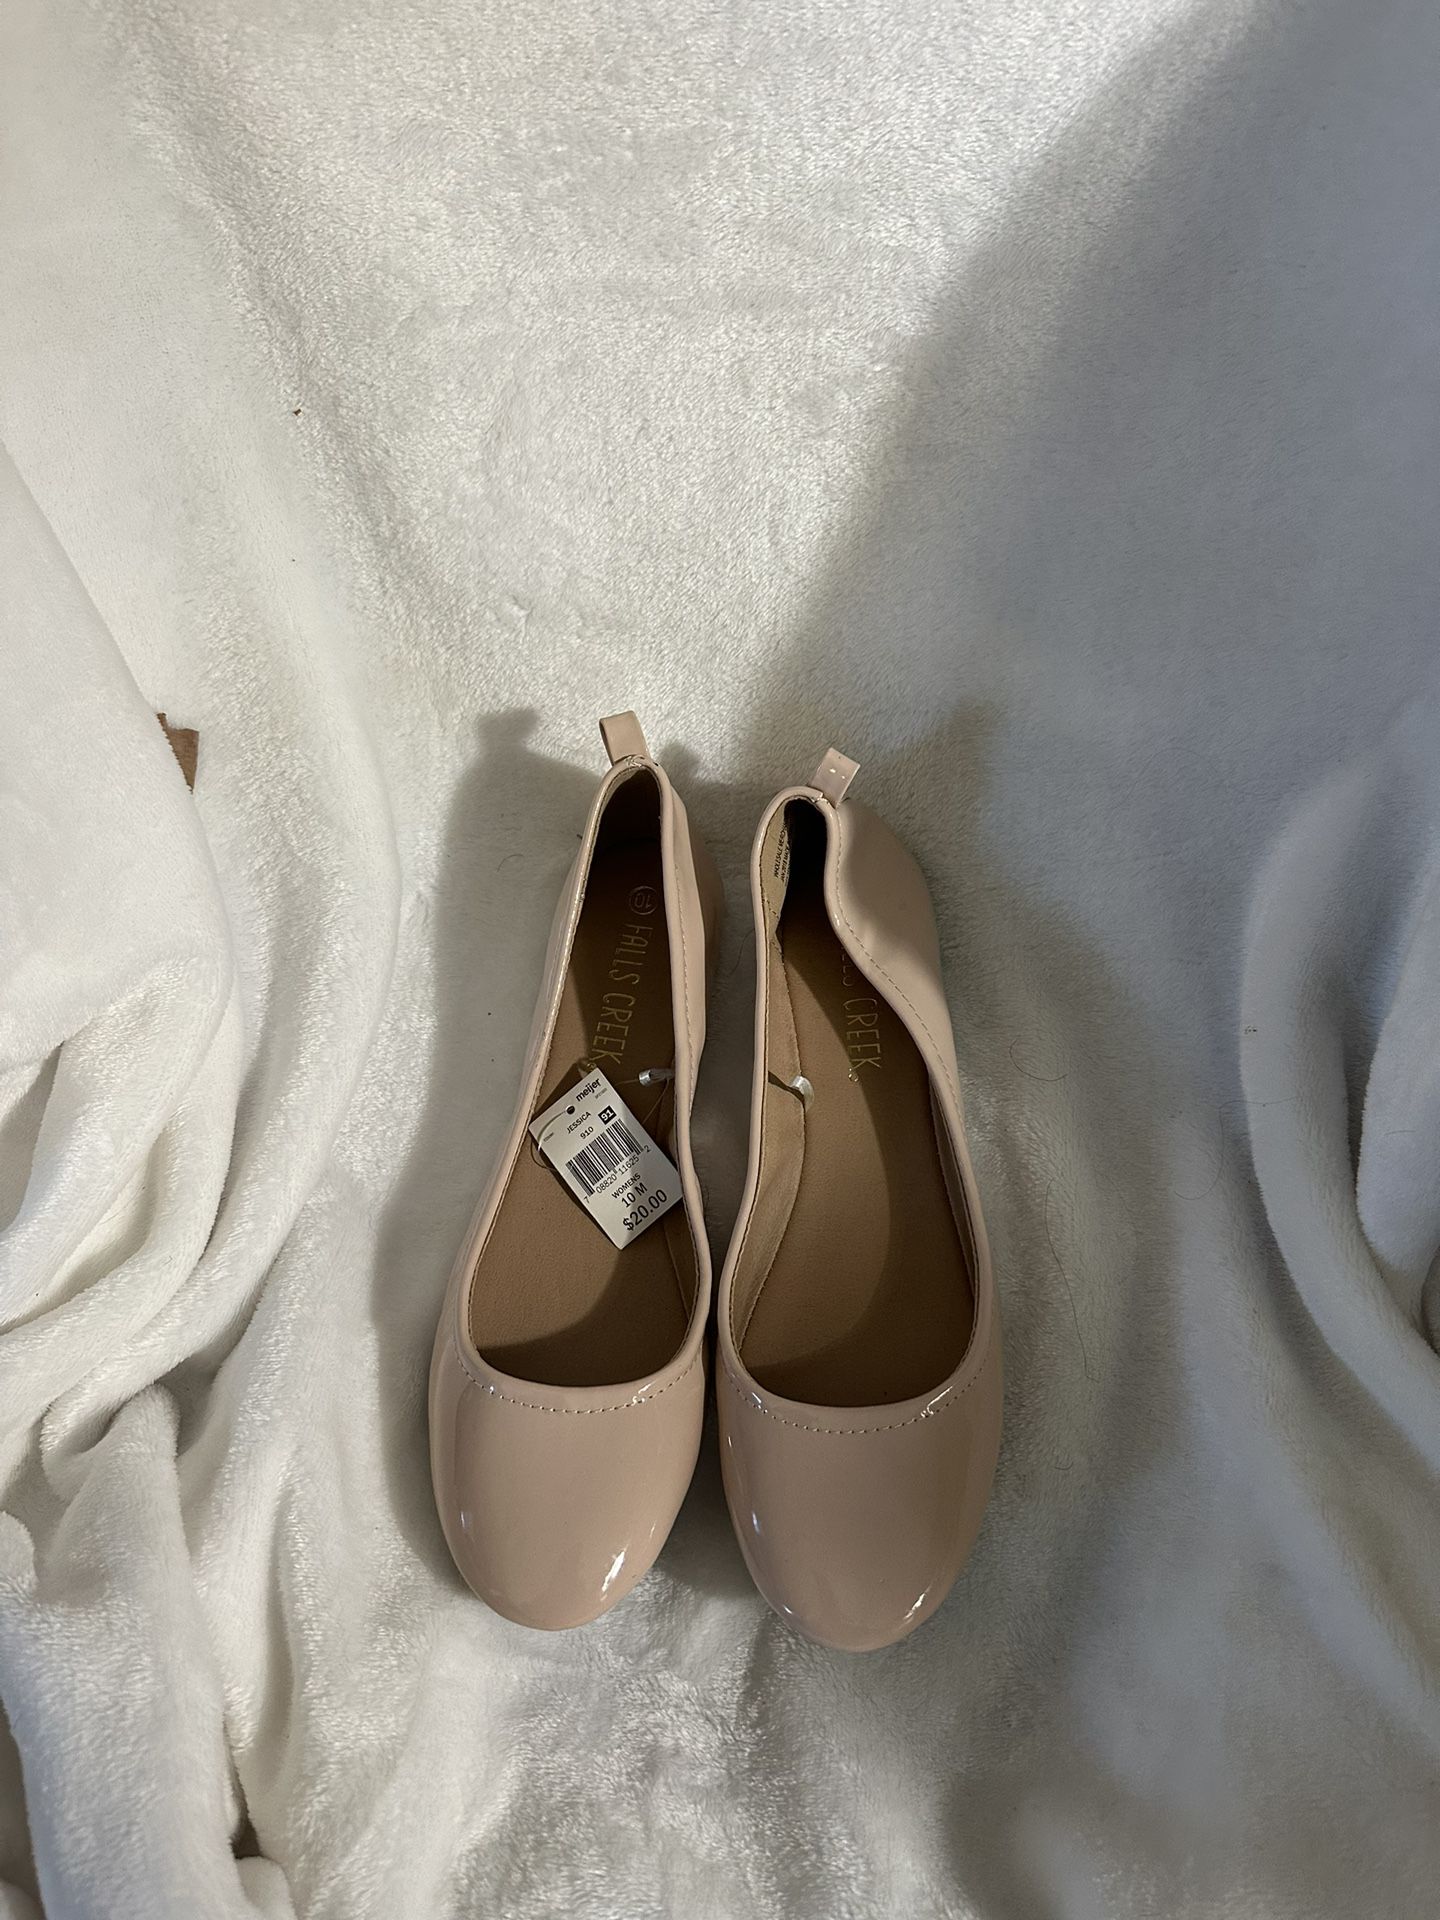 New With Tag Size 10 Ballet Flats Pinkish Great Condition Round Toe  Comfortable 